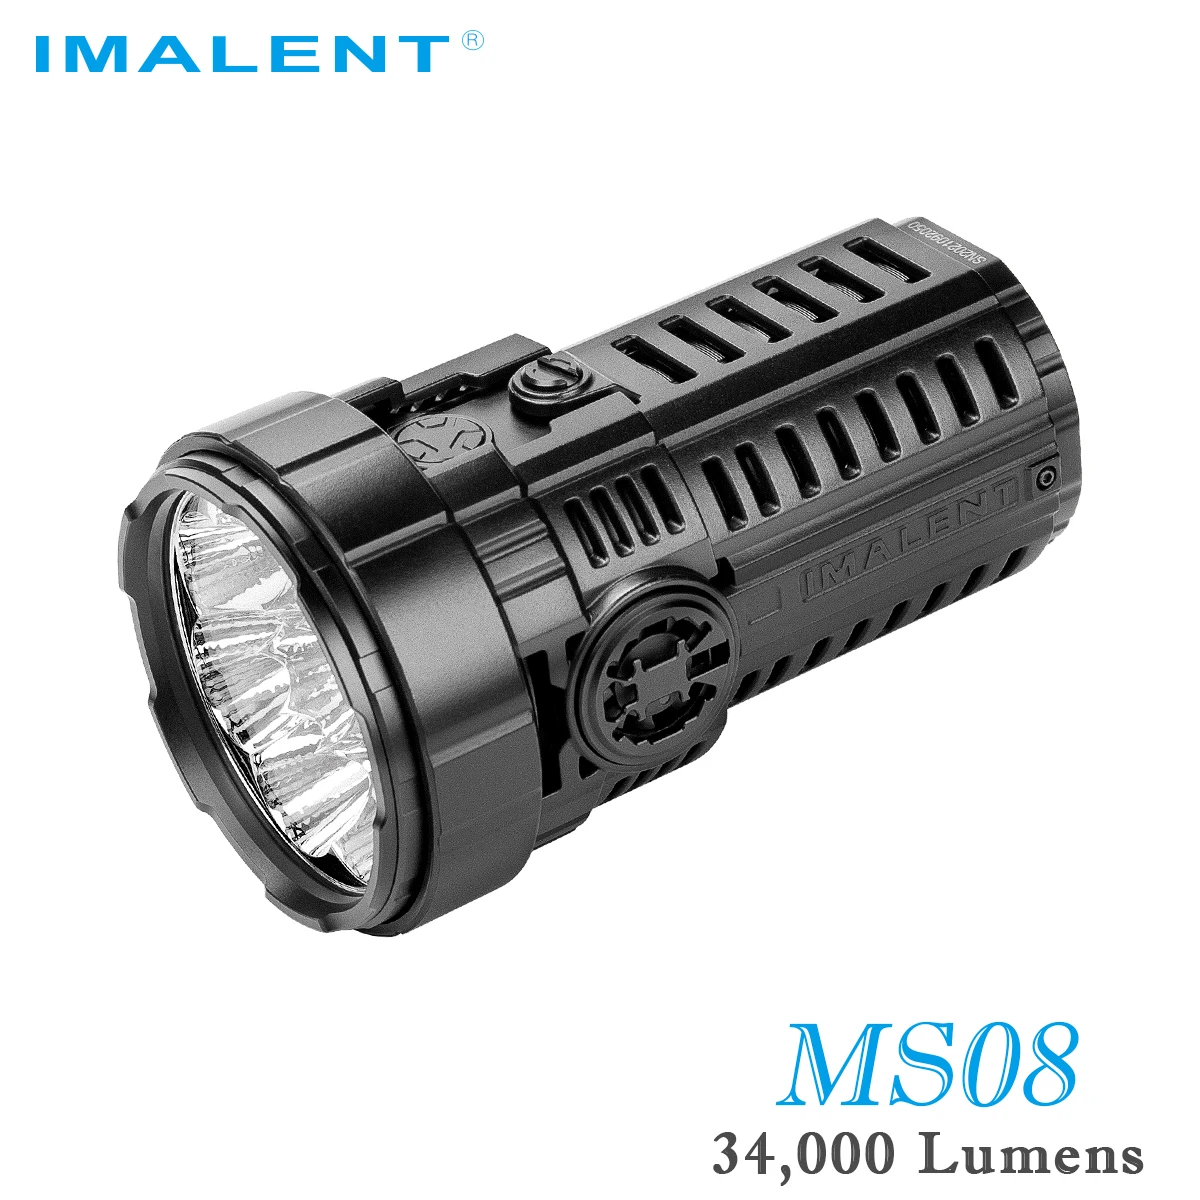 IMALENT MS08 Brightest EDC Flashlight 34000Lumens CREE XHP70.2 LEDs Professional Rechargeable Tactical Torch for Outdoor Camping